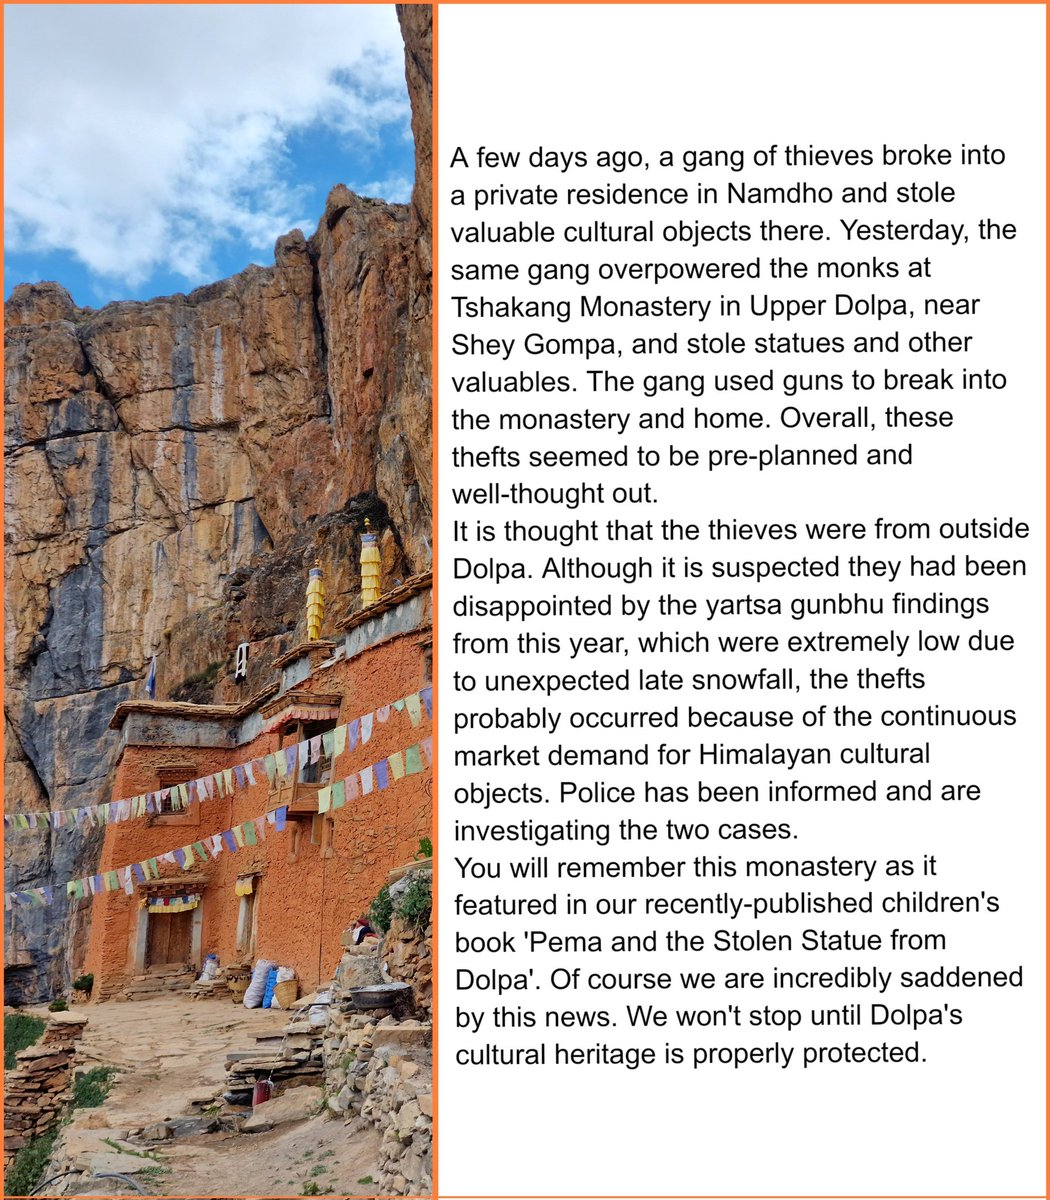 I am extremely heartbroken by this news - please see my statement below. It motivates me to work even harder towards the proper protection and securitization of Dolpo's cultural heritage #stoplooting #returnthegods #Dolpoculturalheritage #protectheritage